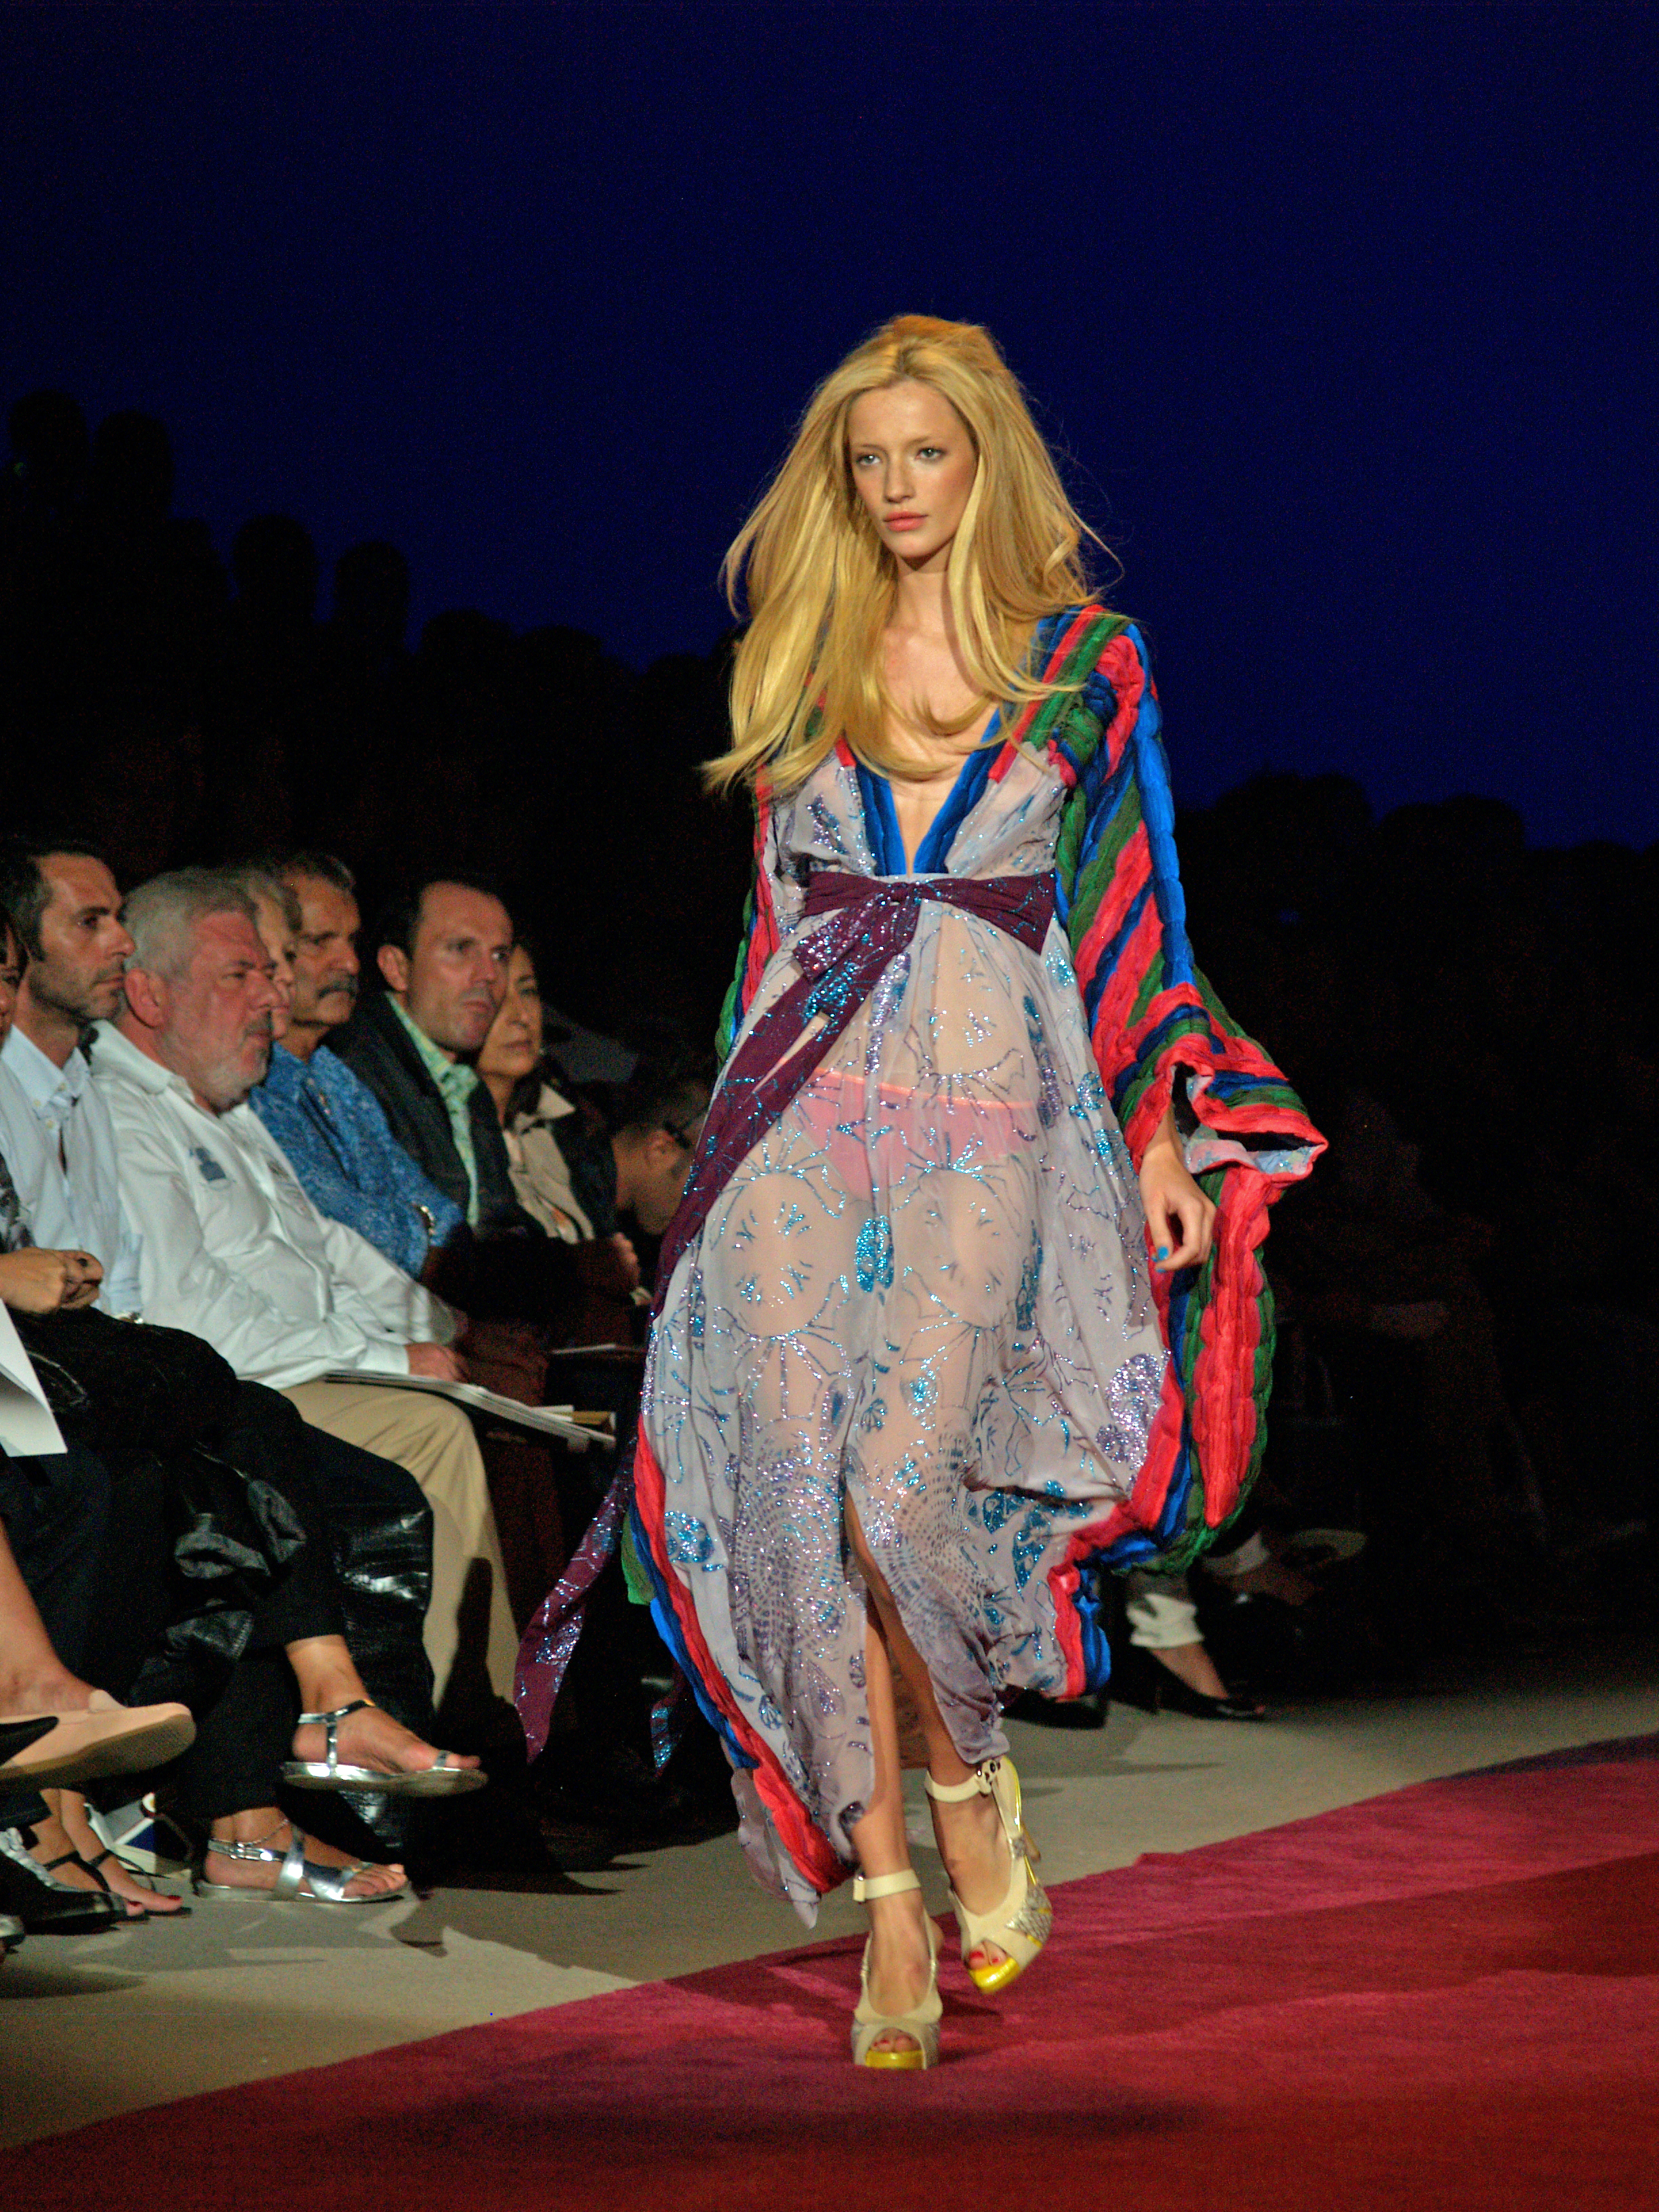 Unveiling the Price Tag: Analyzing the Costly Elements of the World's Elaborate Fashion Shows